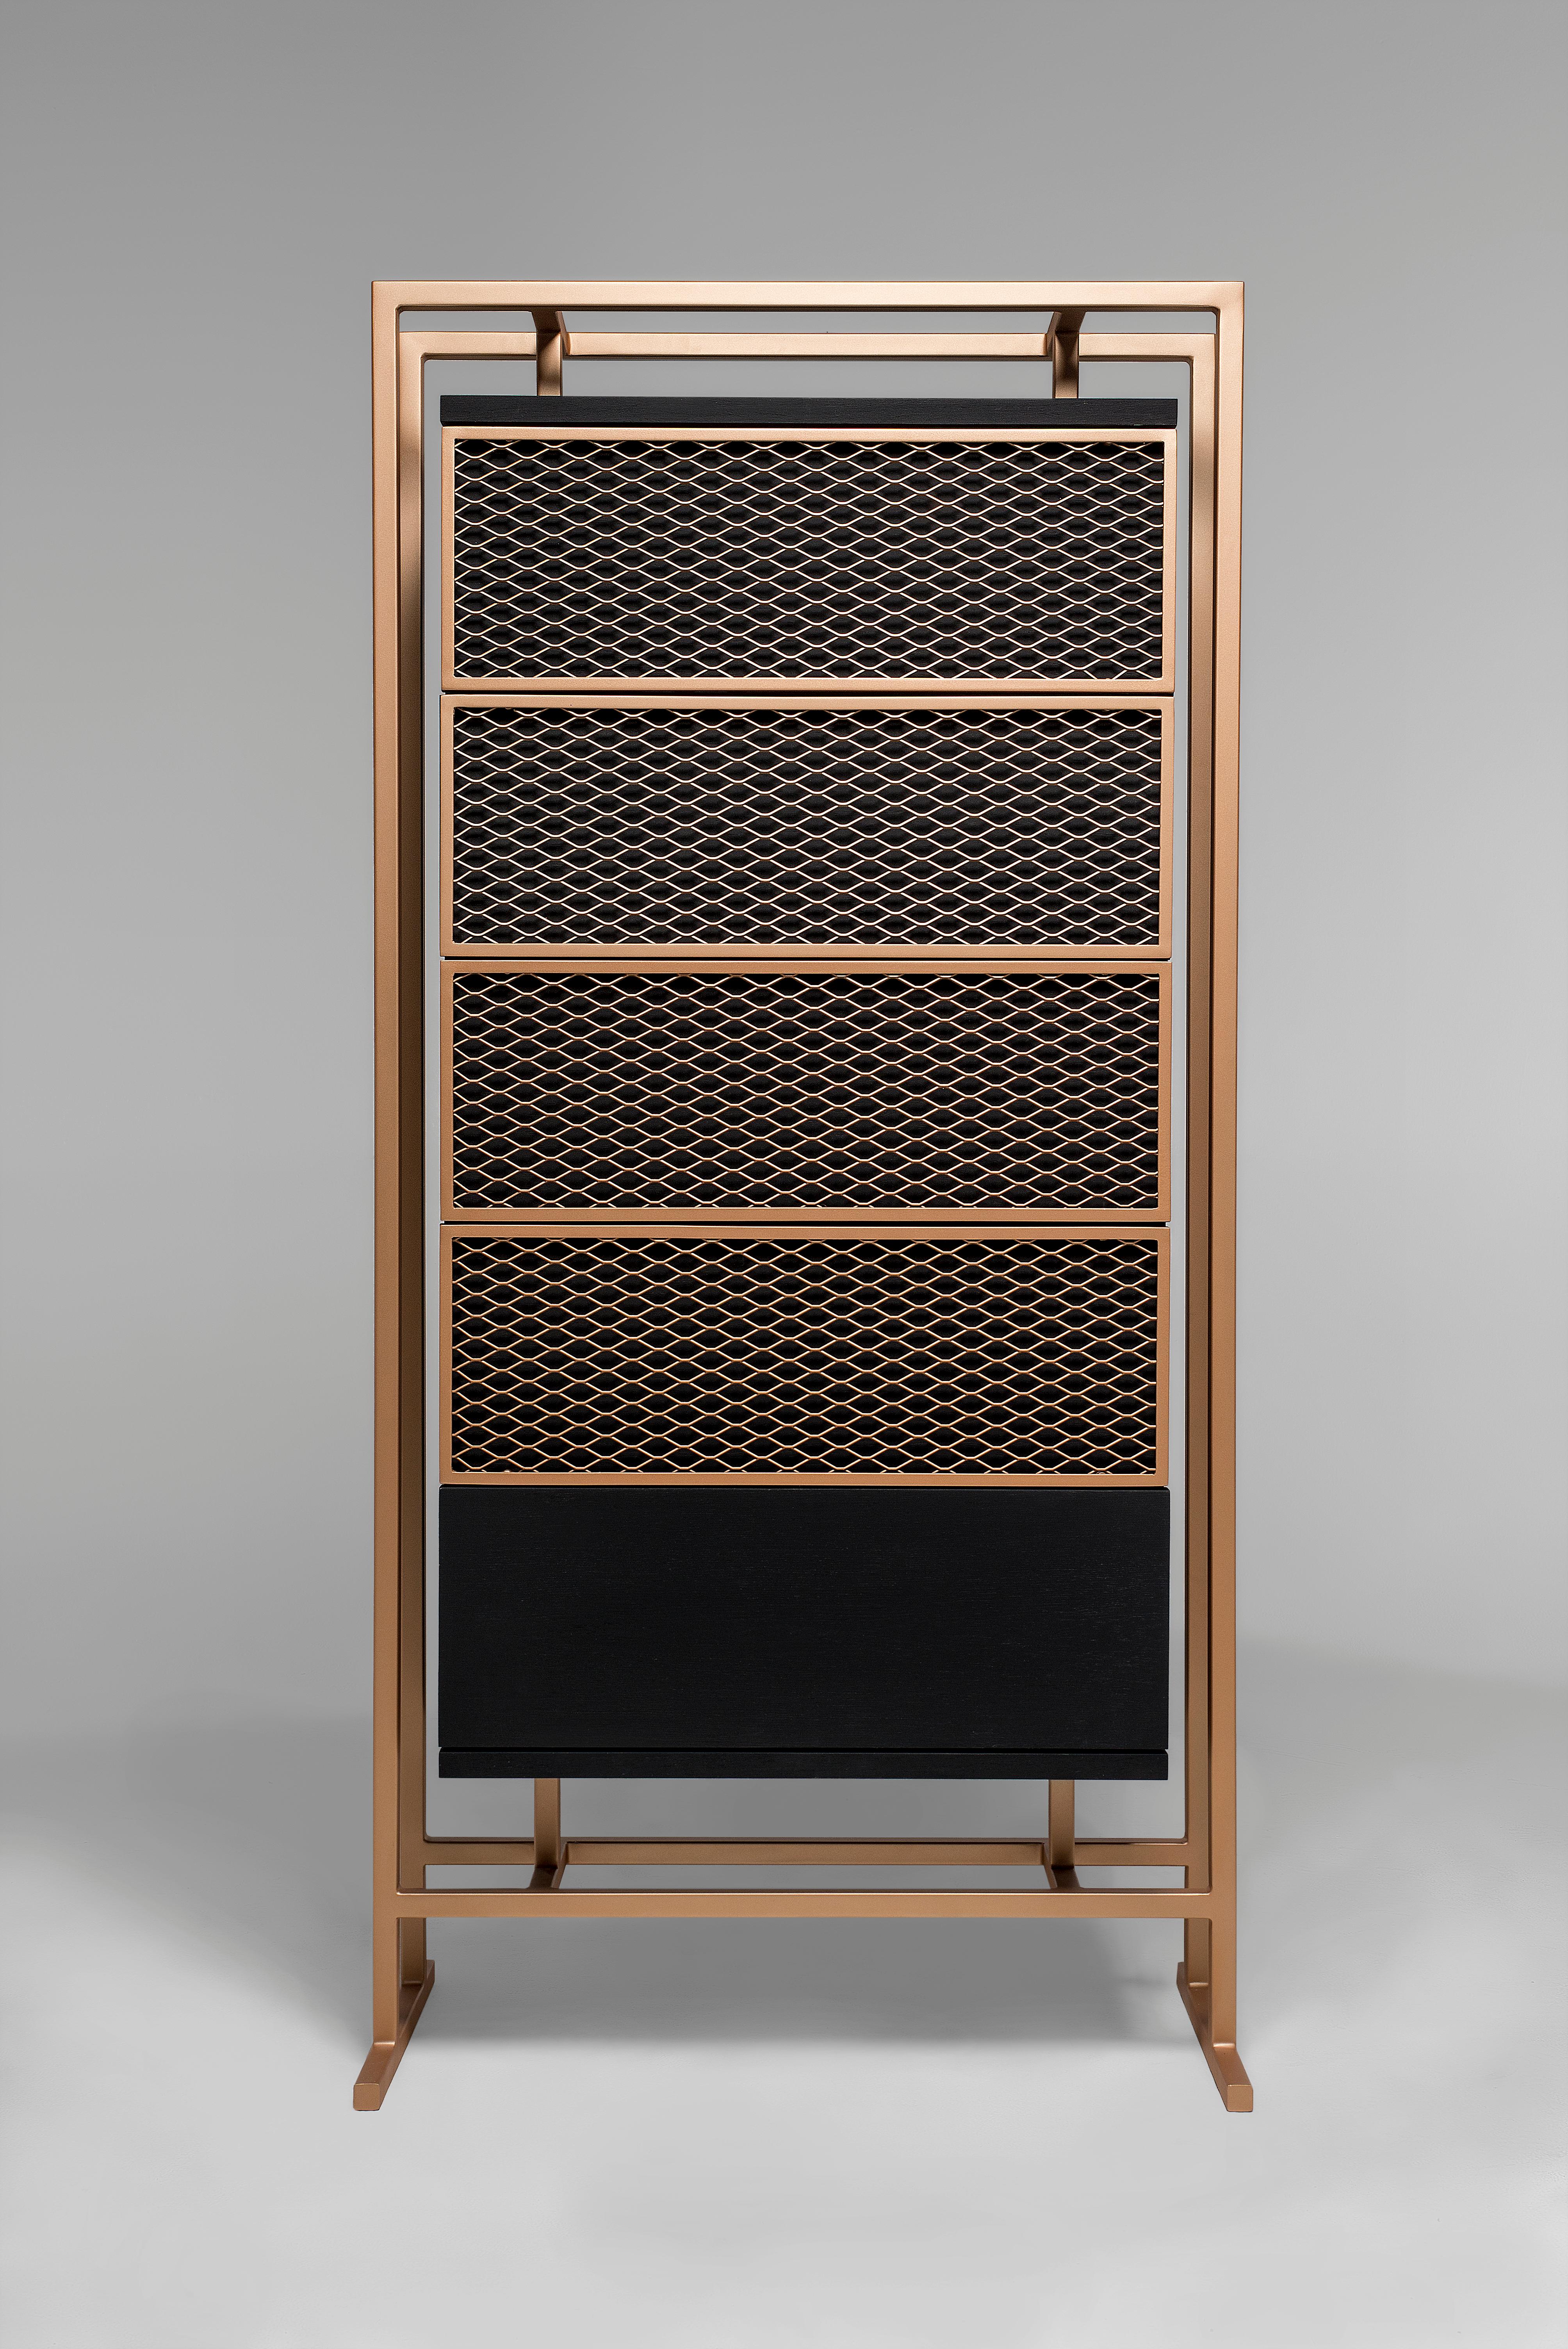 Excellent in size and style, the Ezera drawer is a perfect fit for any living room, narrow corridor and entry hall. Fabricated out of wood, metal, and designed by Lara Batista, this modern cabinet is a master class of design that brings with it the